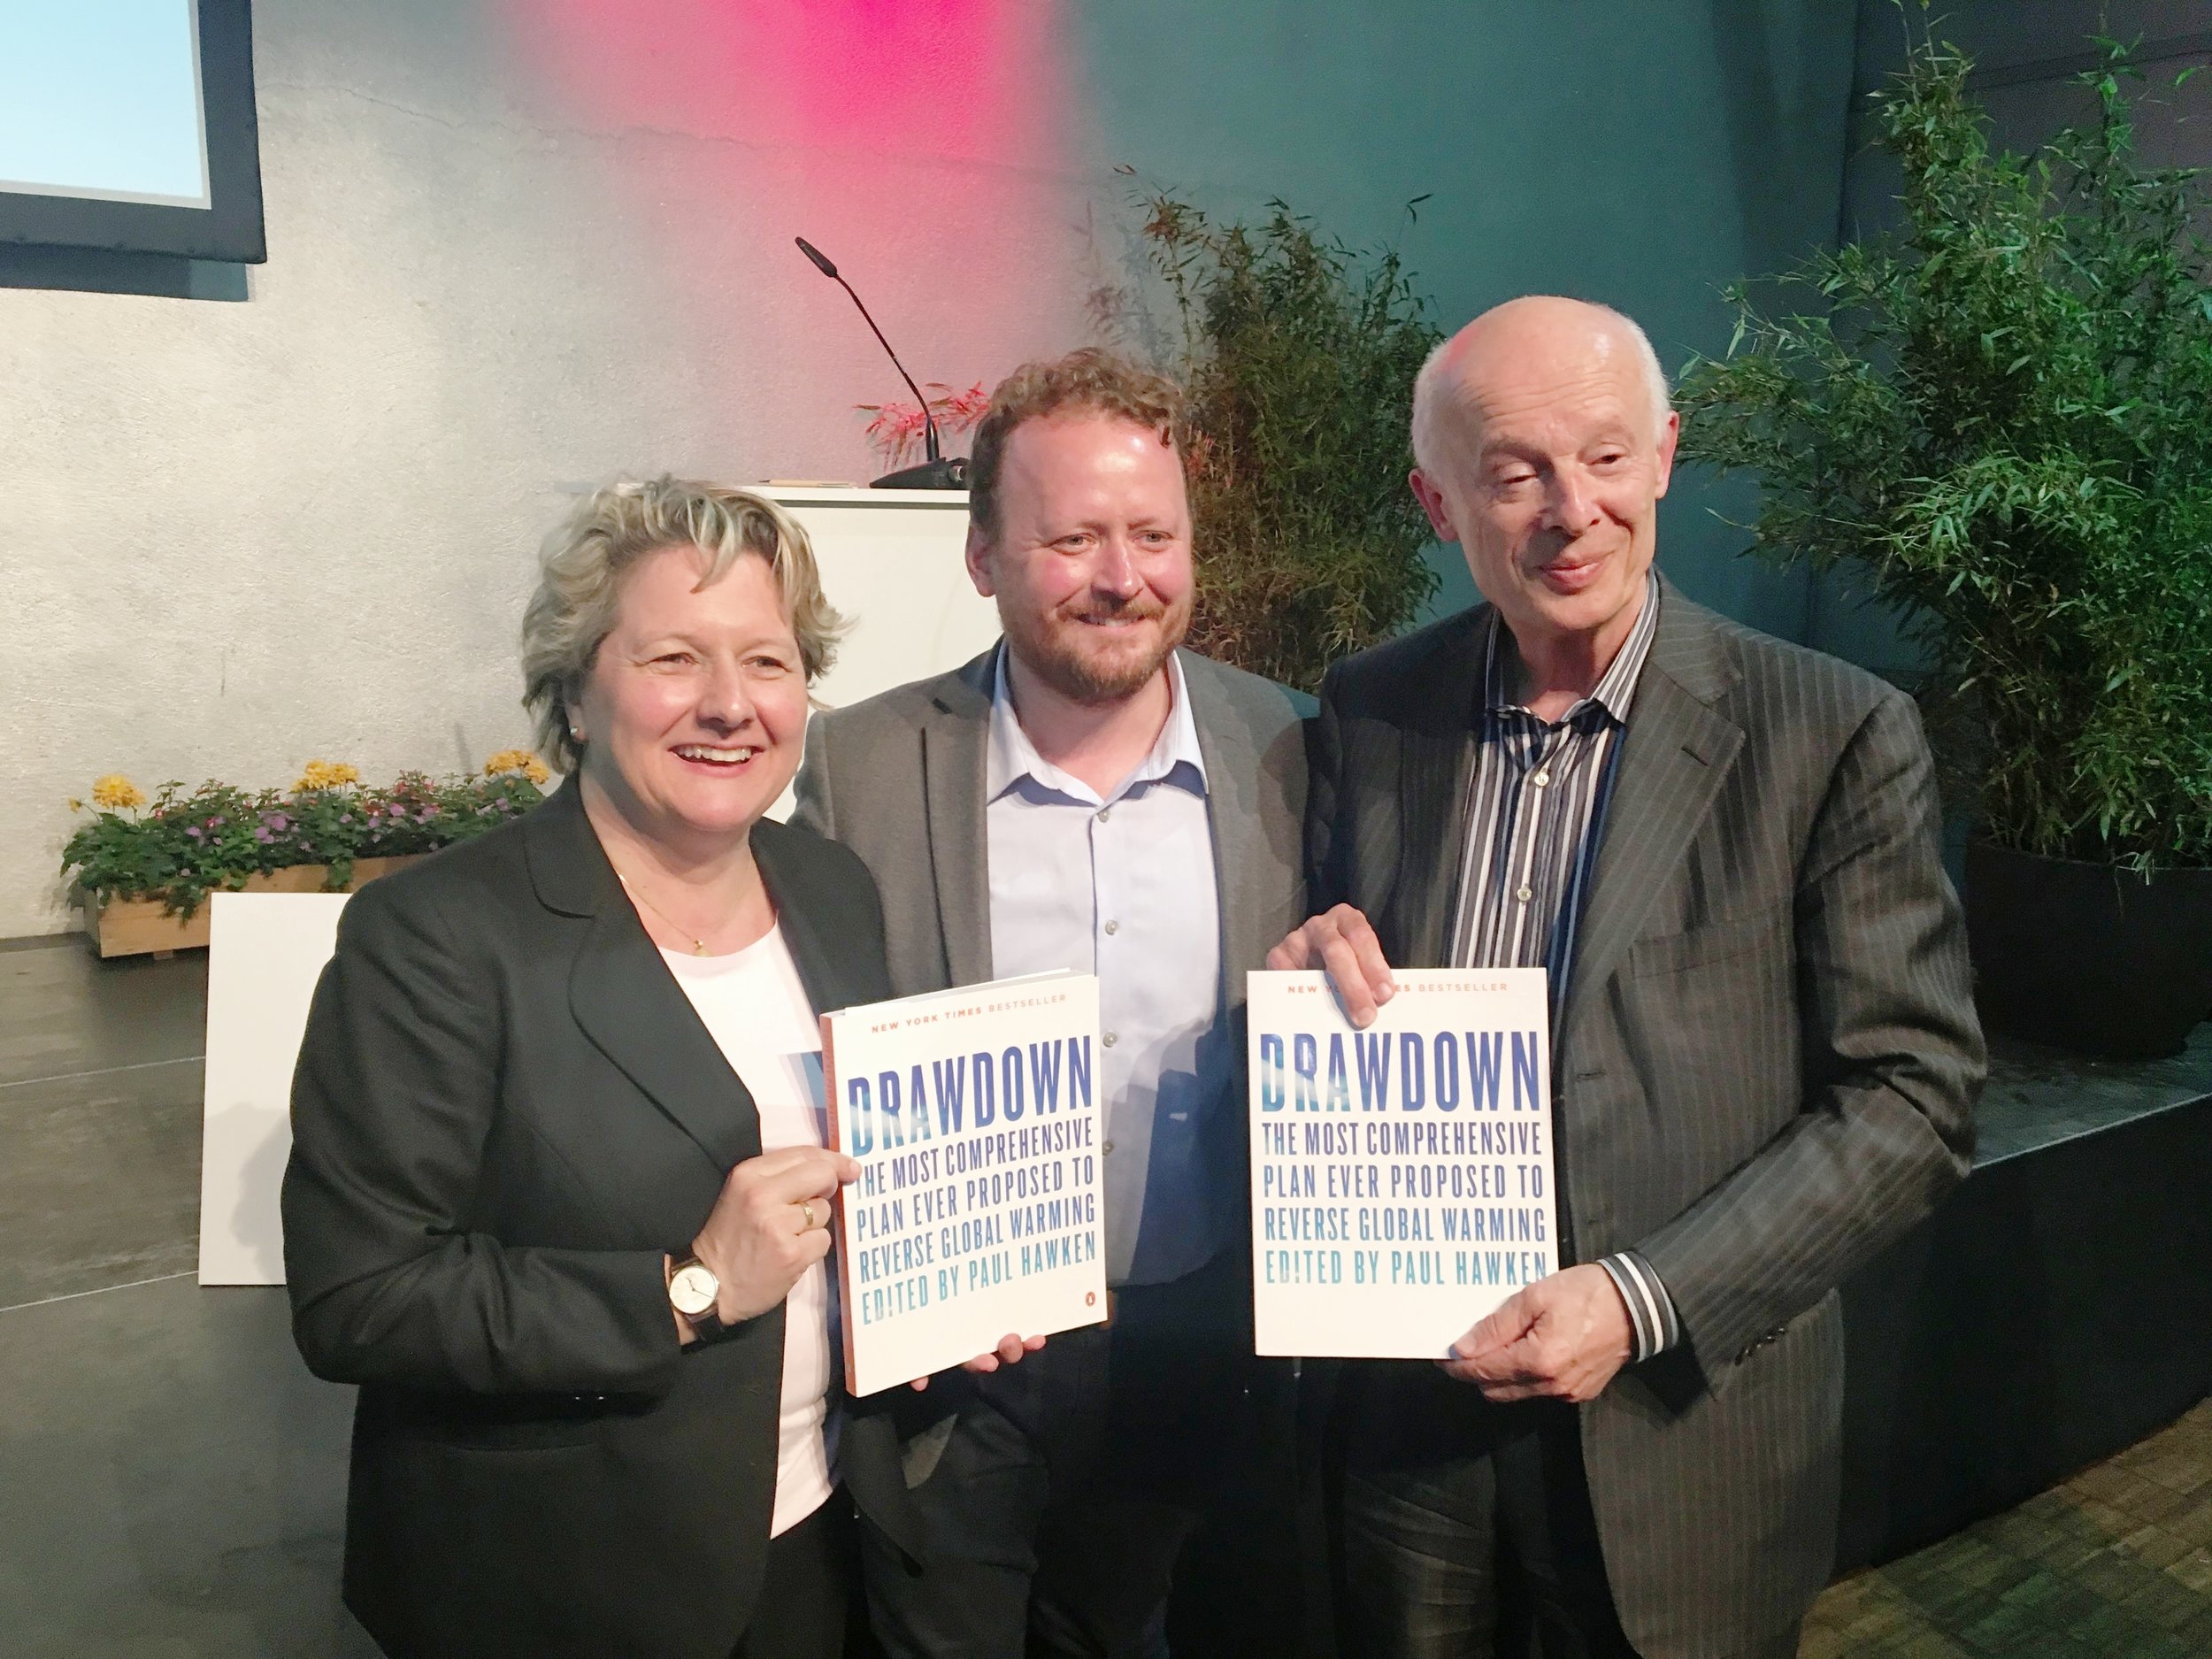  @ launch of Drawdown Europe with Svenja Schulze, German Federal Minister for the Environment, and Prof. Dr. h.c. Hans Joachim Schellnhuber, Director of the Potsdam Institute for Climate Impact. 